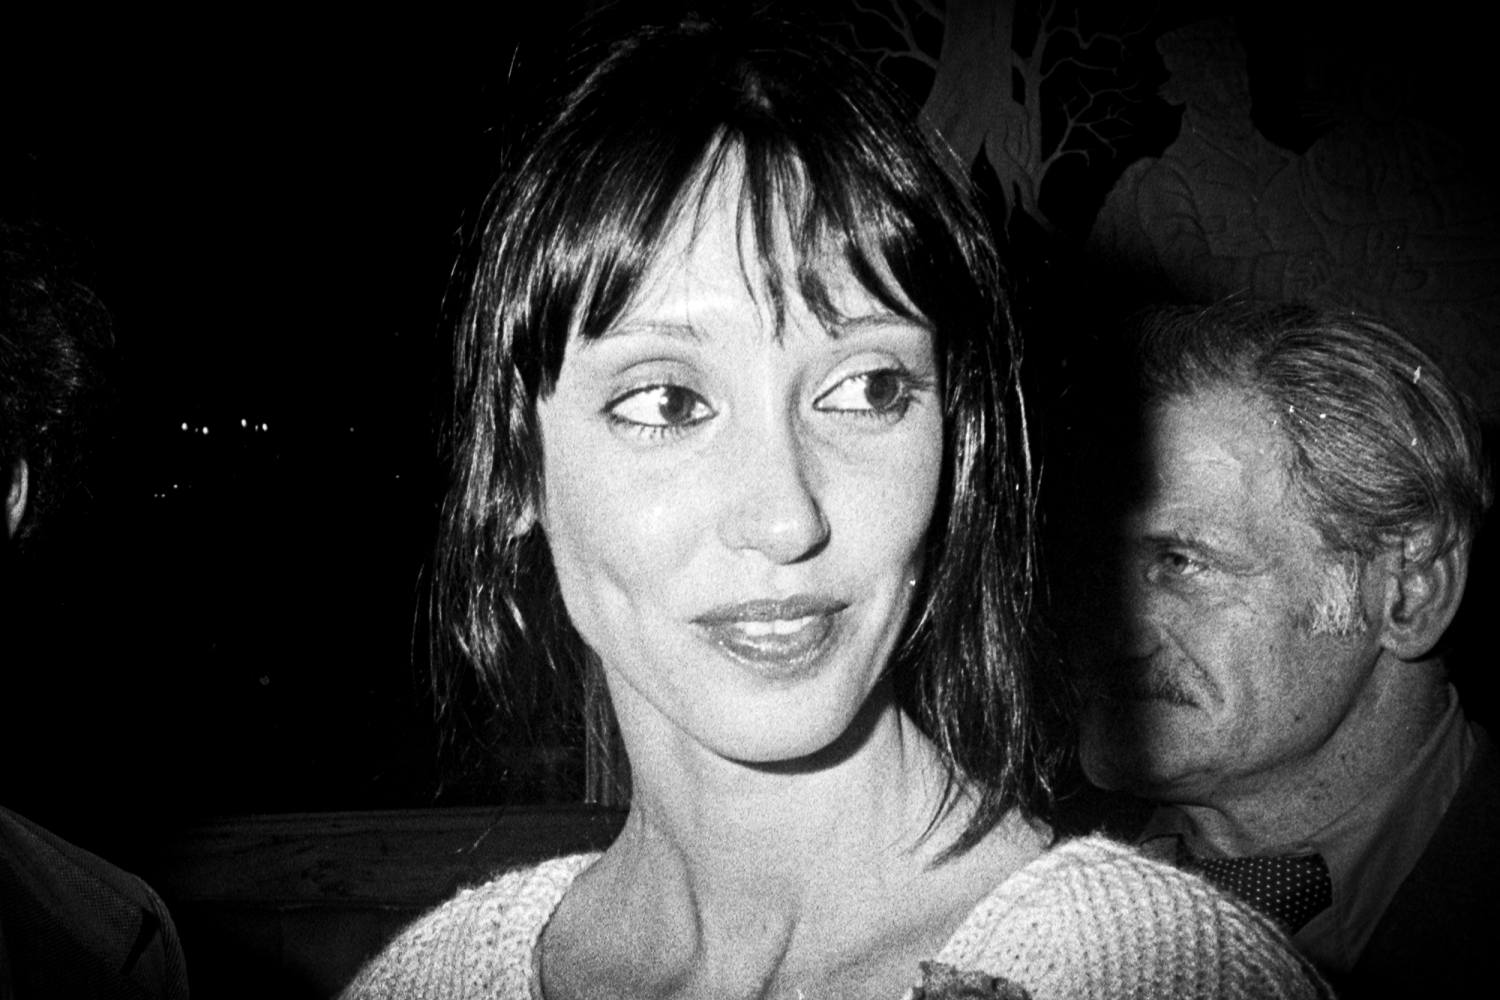 Shelley Duvall, 'The Shining' actor and Robert Altman muse, dies at 75